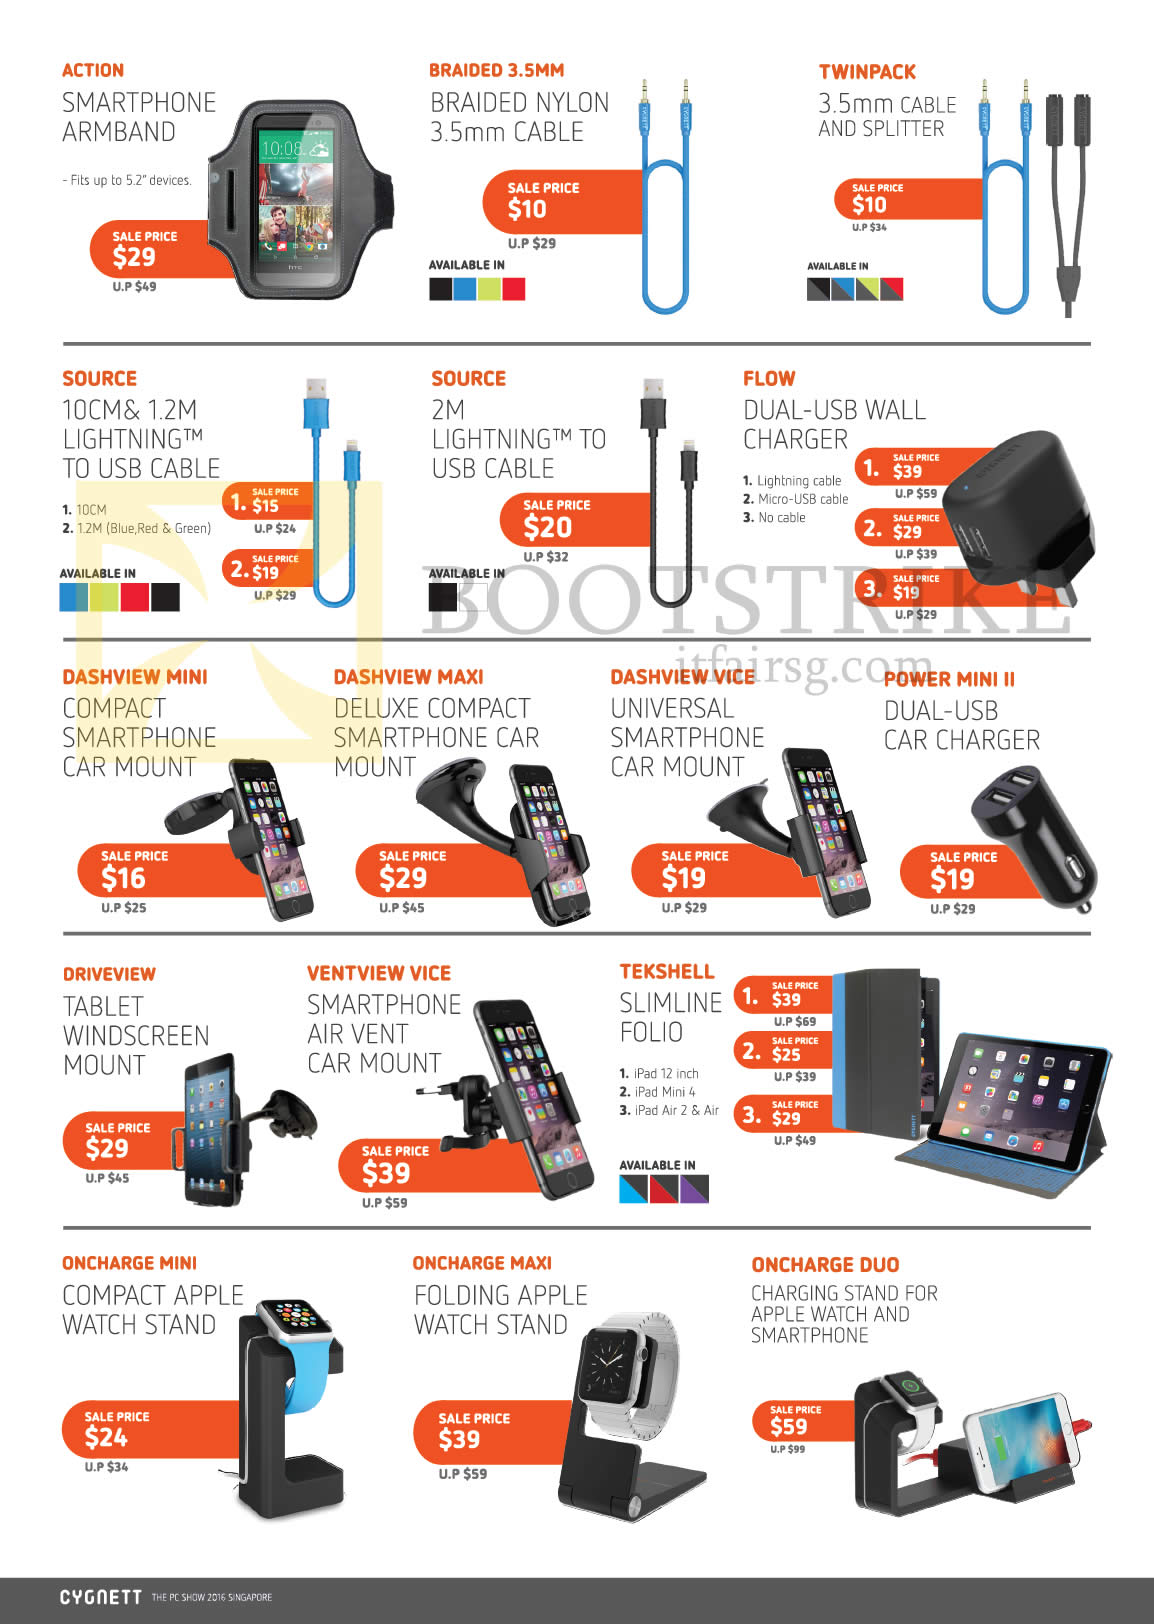 PC SHOW 2016 price list image brochure of Nubox Cygnett Accessories Smartphone Armband, Cable, Splitter, USB Wall Charger, Smartphone Car Mount, Slimline Folio, Apple Watch Stand, Car Charger